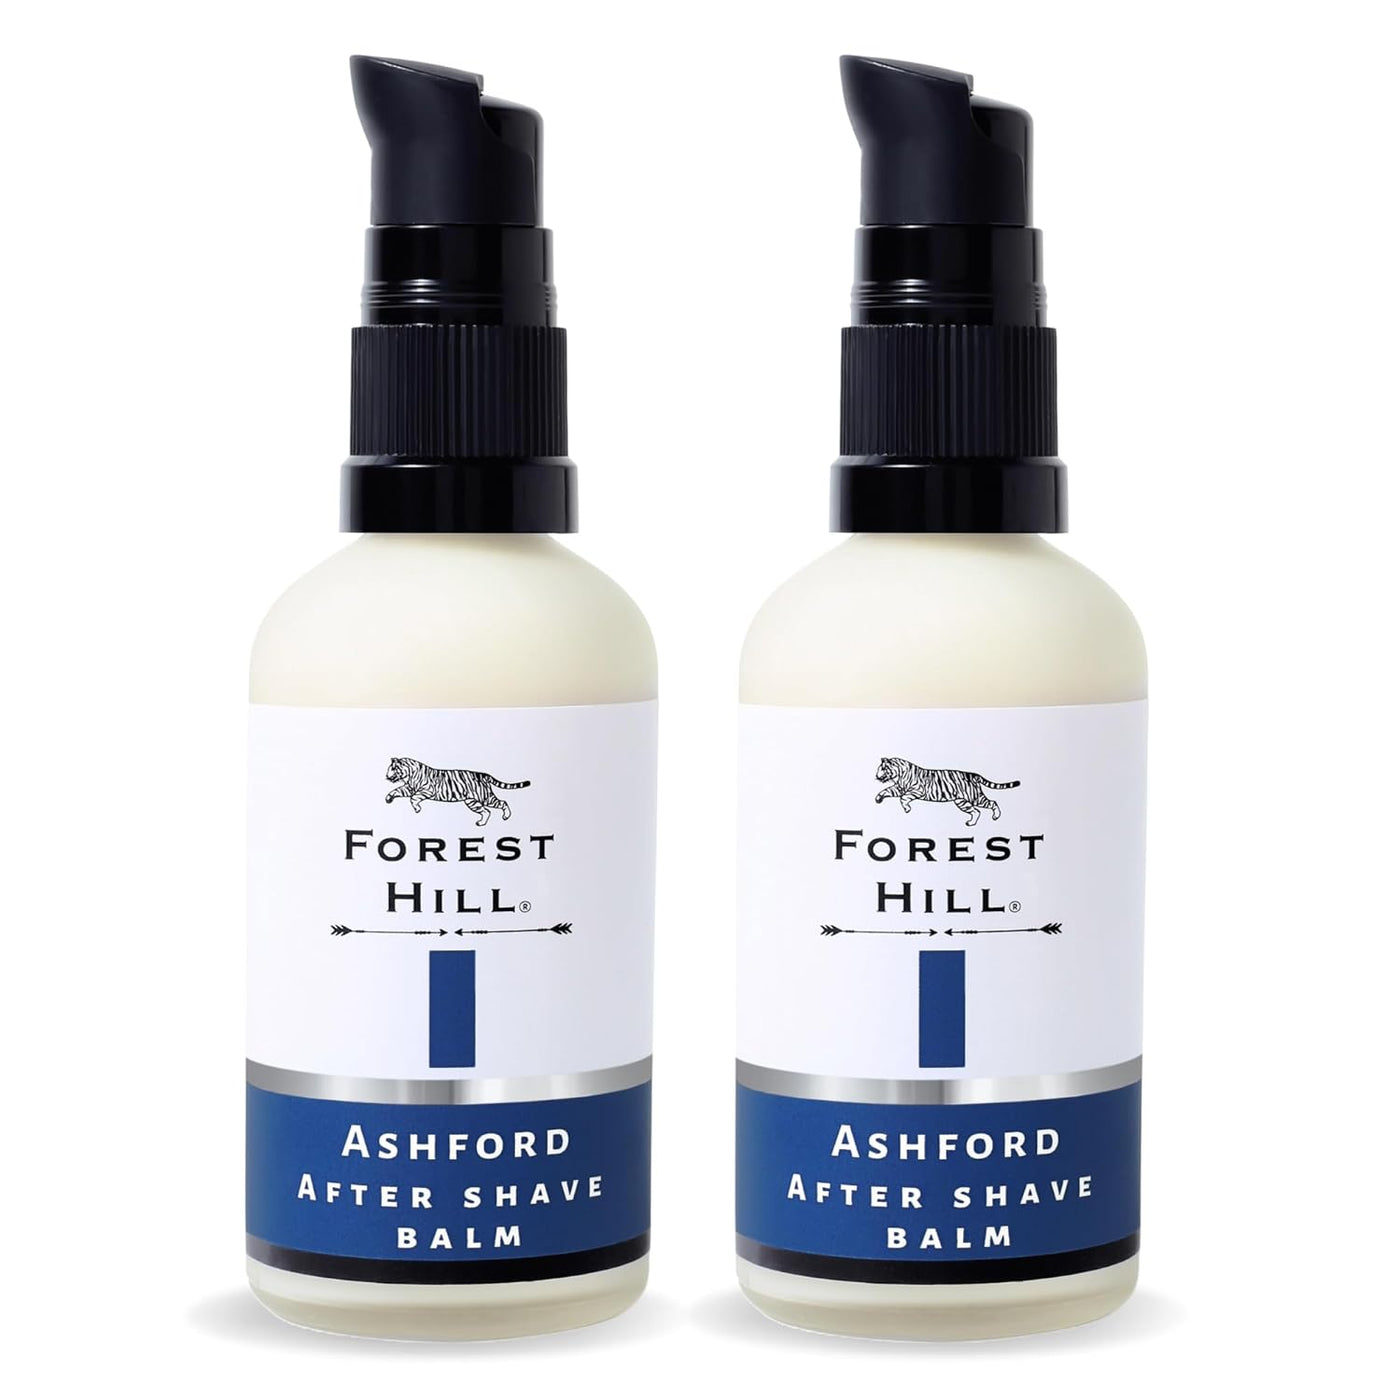 Forest Hill Ashford after shave balm, 200ml, pack of 2